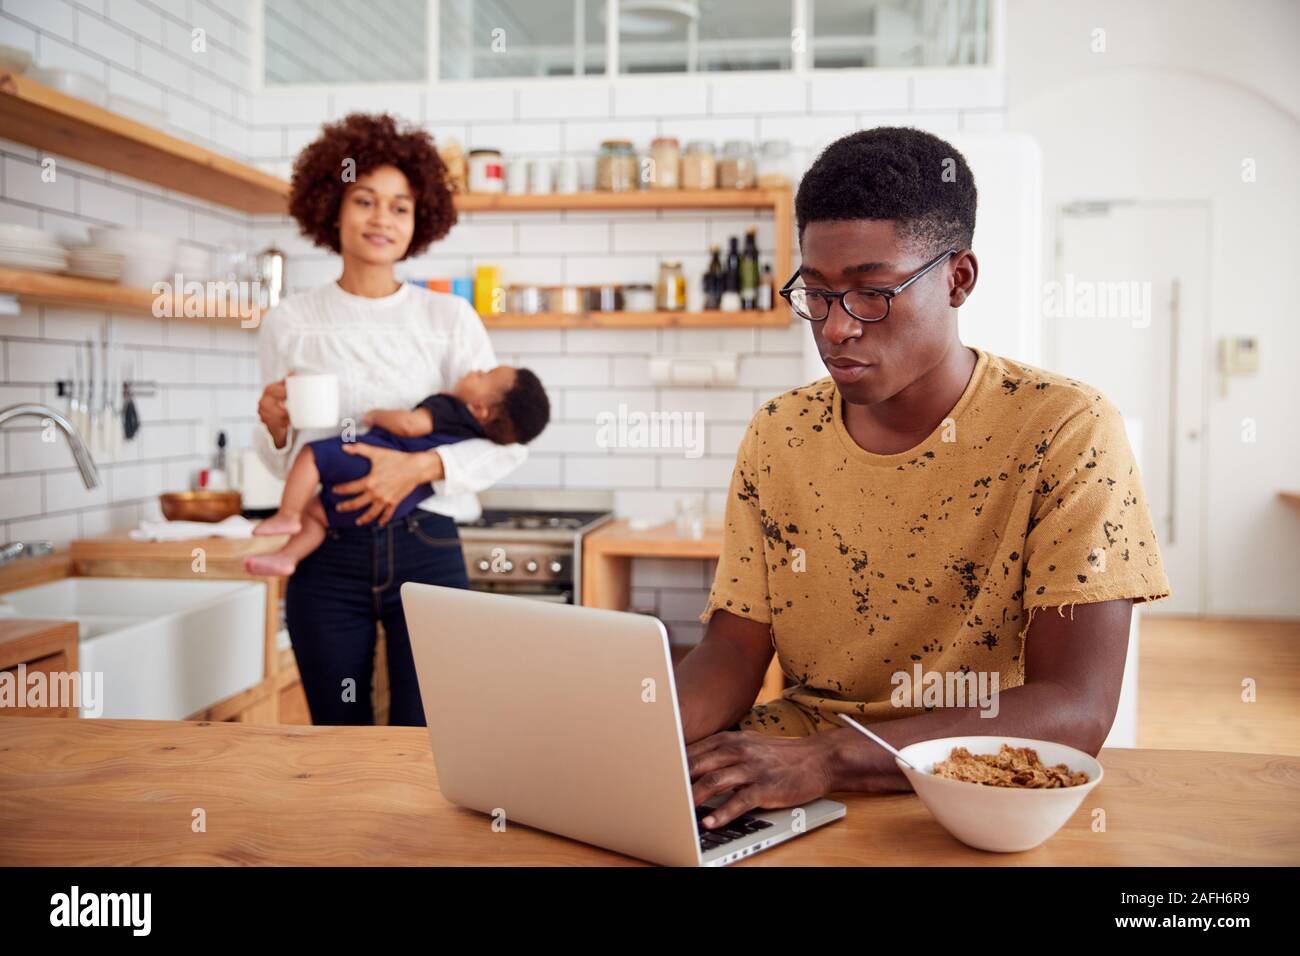 Multi-Tasking Mother Holds Baby Son And Makes Hot Drink As Father Uses Laptop And Eats Breakfast Stock Photo